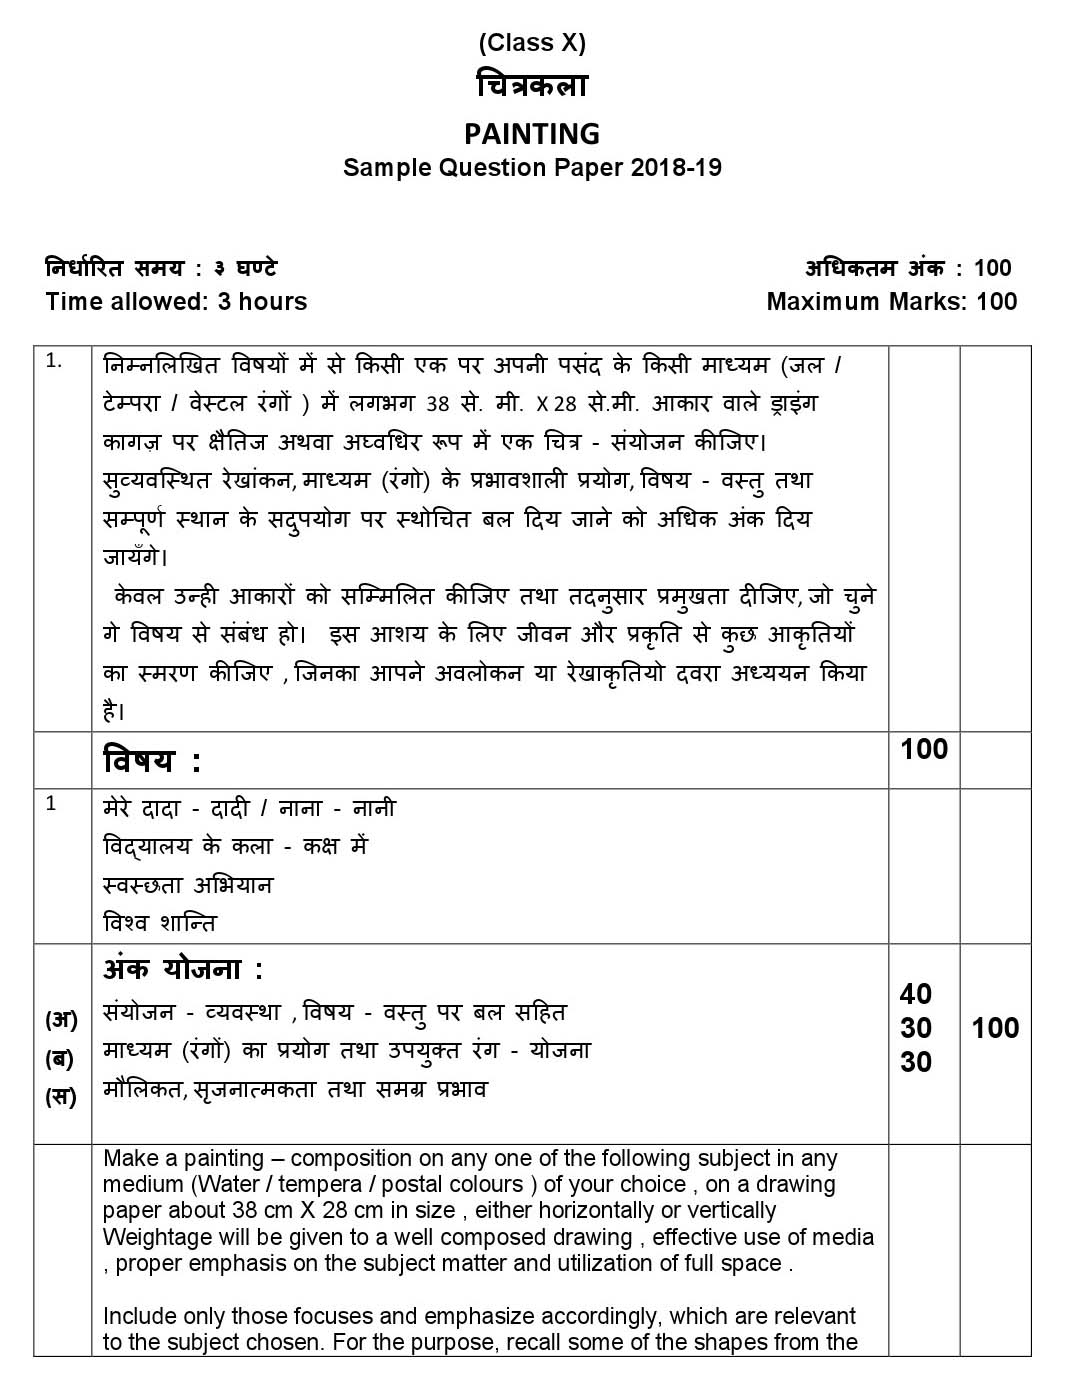 Painting CBSE Class X Sample Question Paper 2018-19 - Image 1